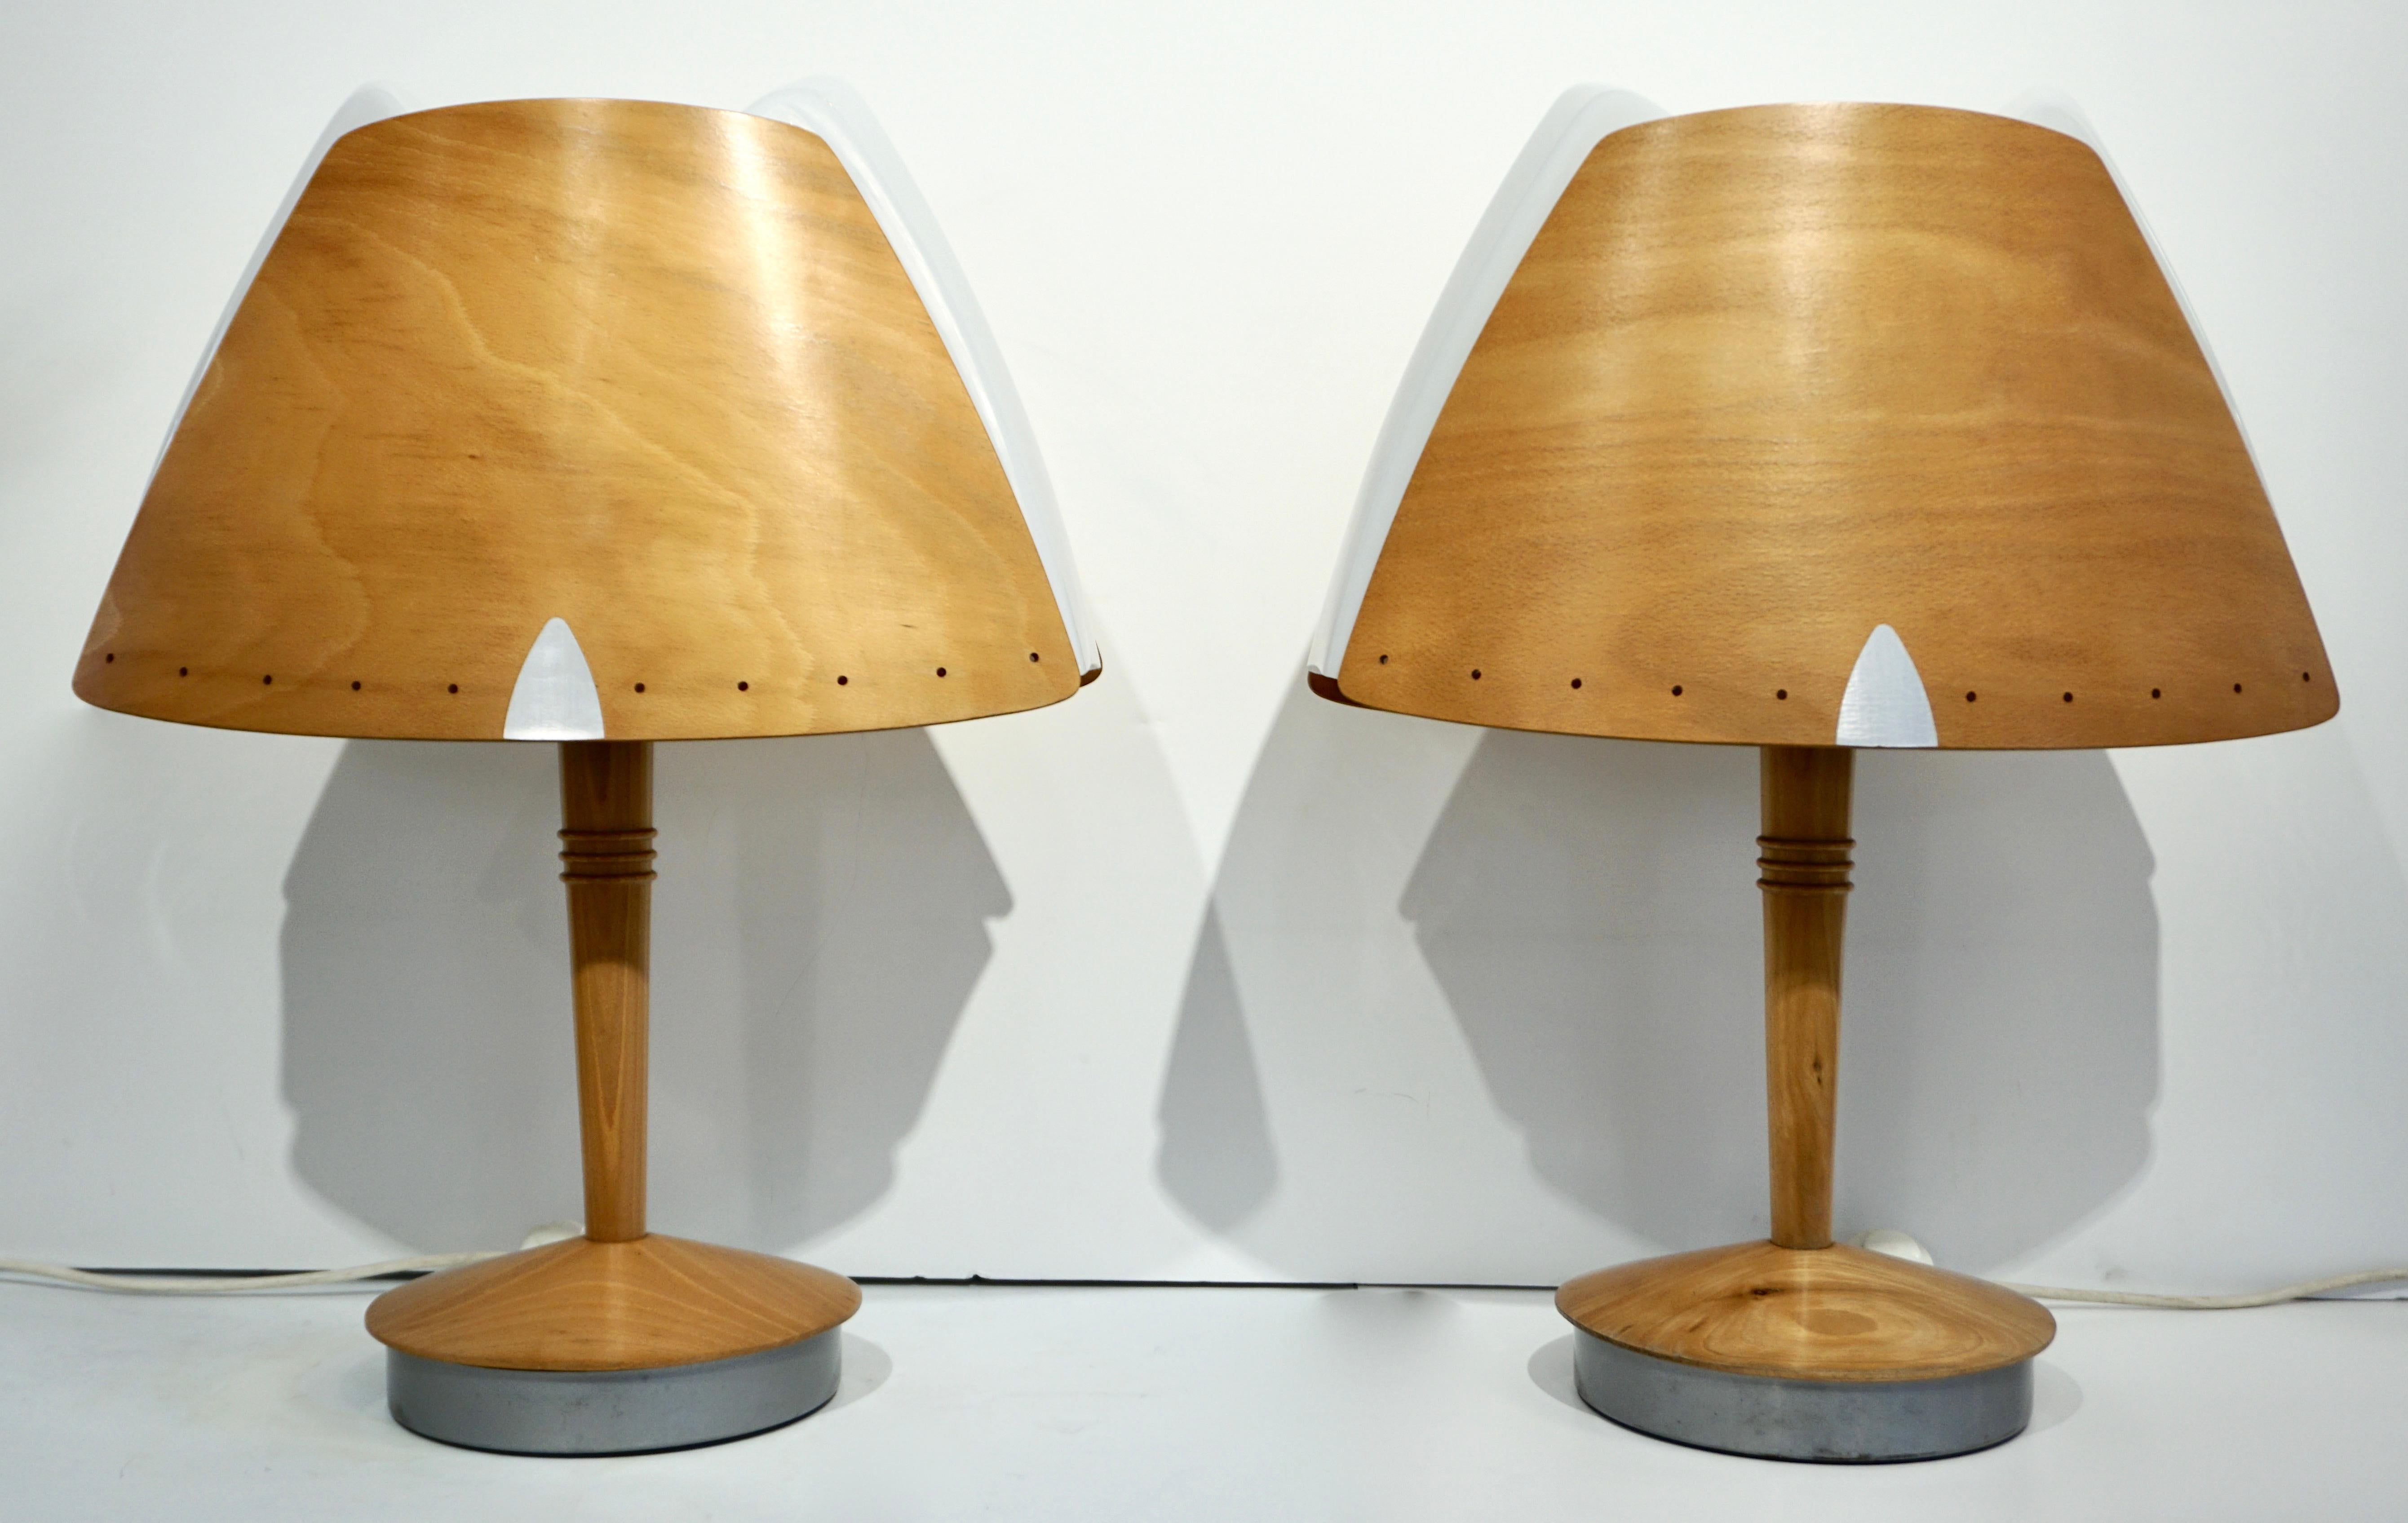 1970 French Vintage Birch Wood and Acrylic Table Lamp for Barcelona Hilton Hotel For Sale 3